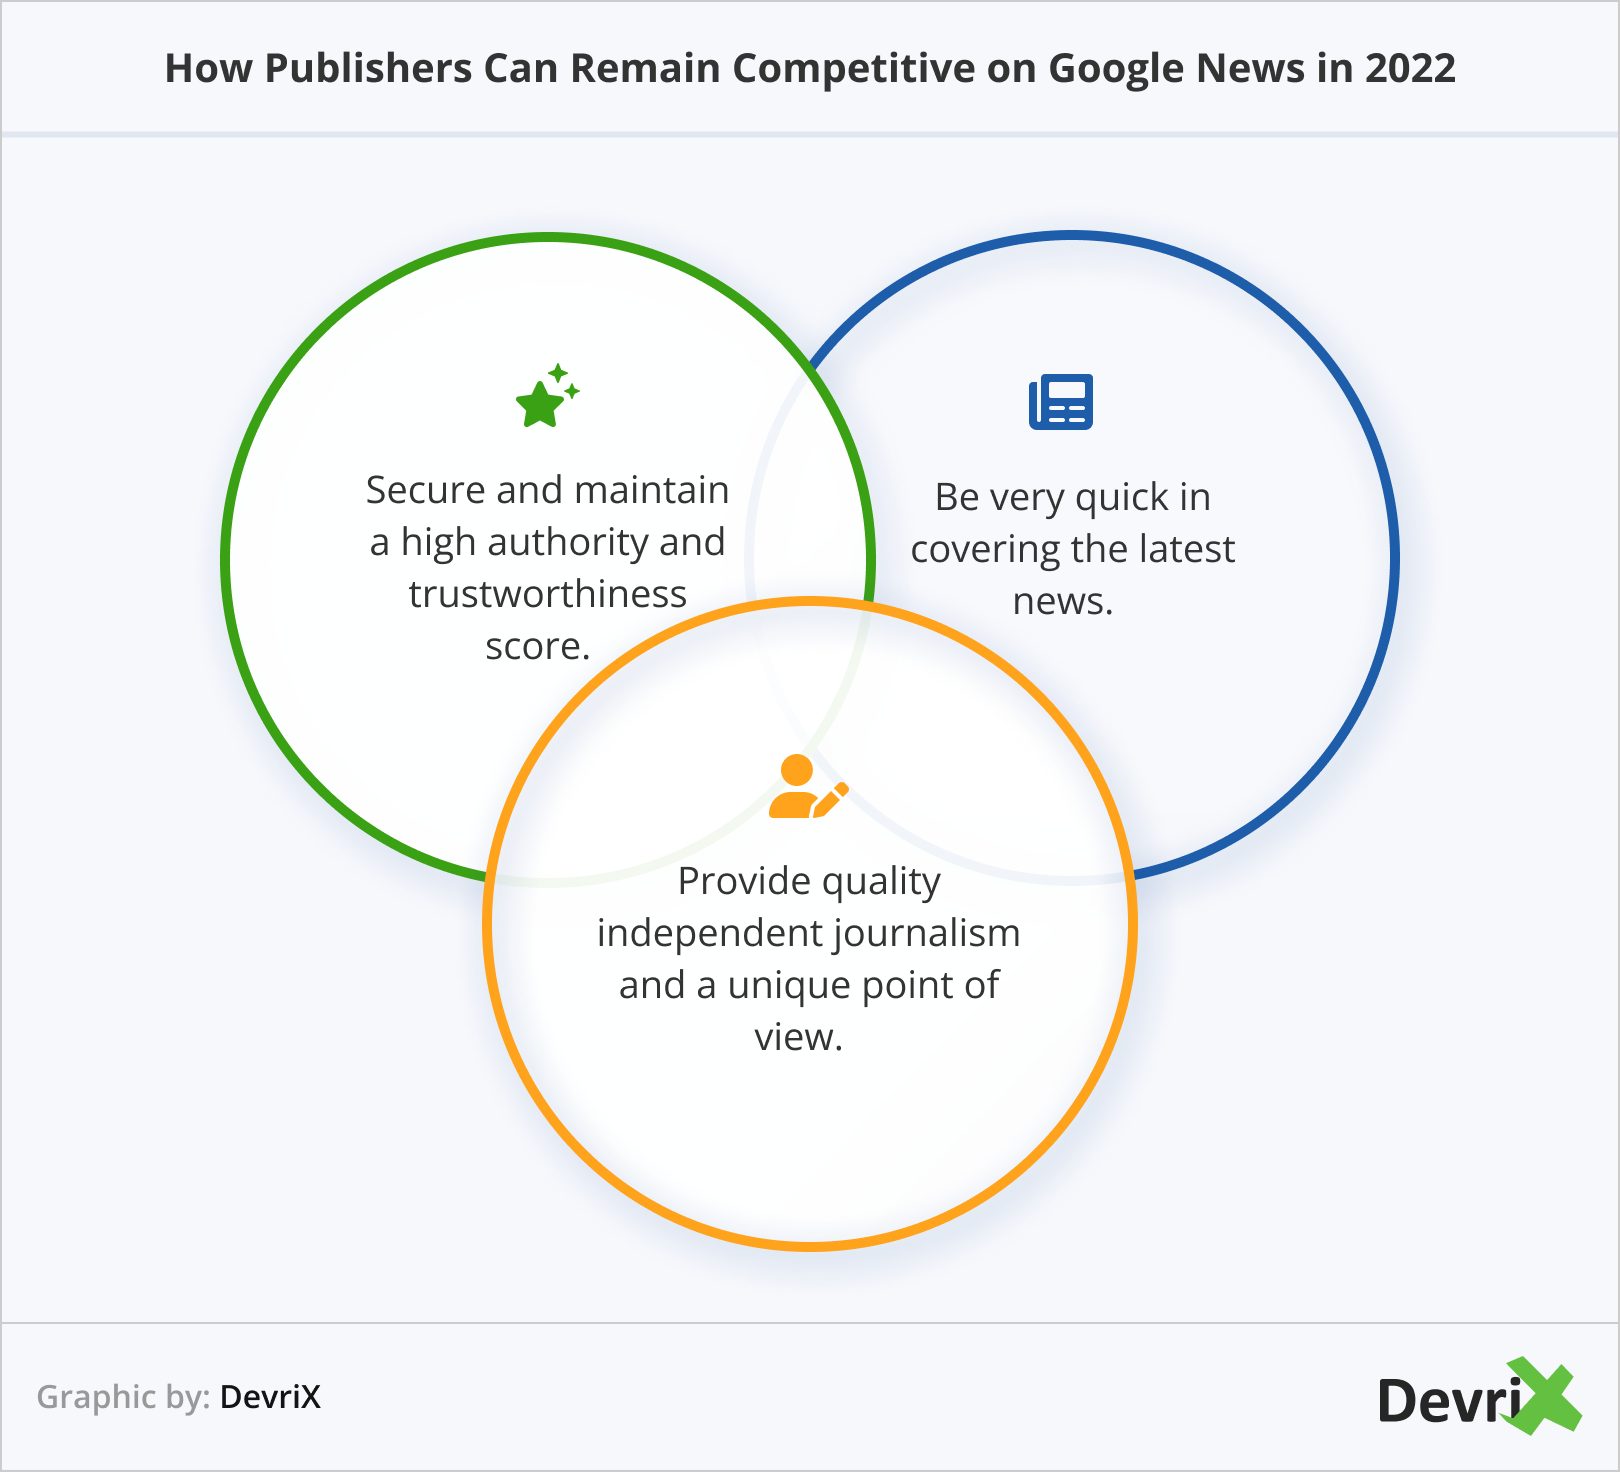 Remaining Competitive on Google News